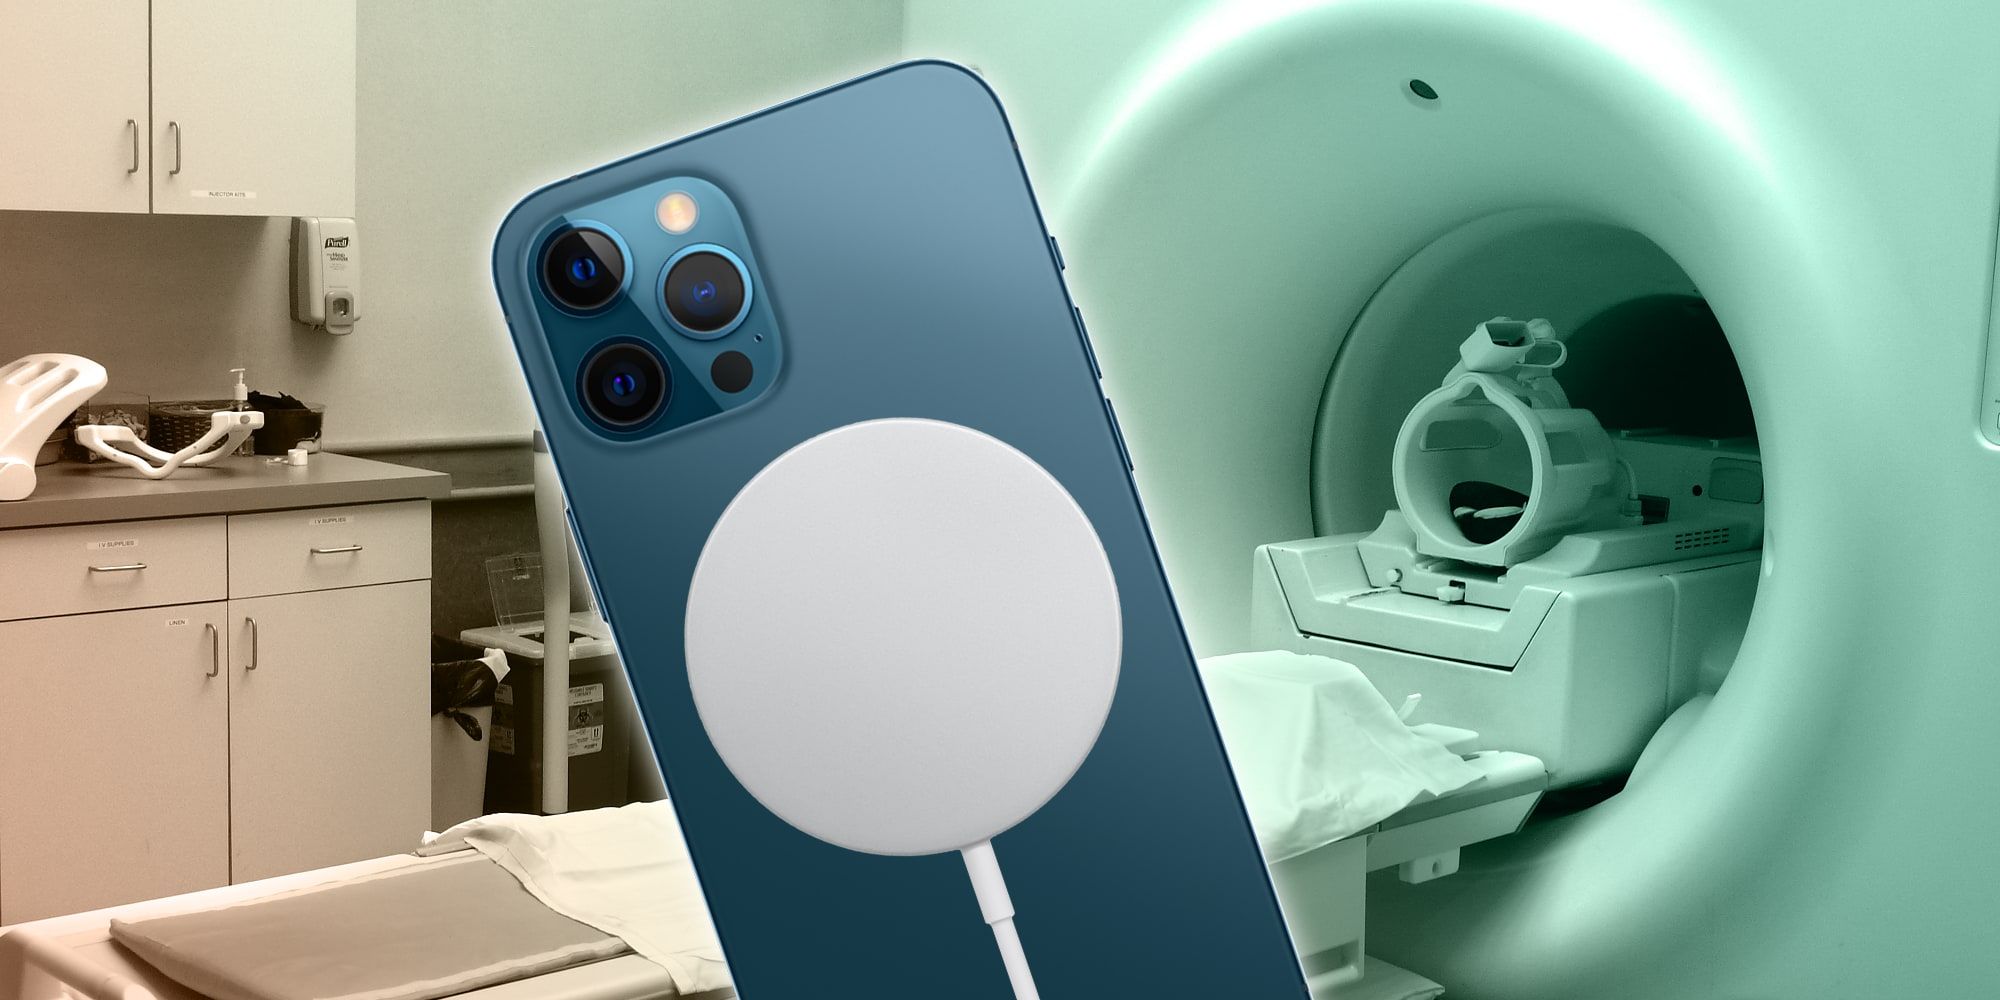 Apple iPhone 12 MagSafe Charging Over MRI Medical Room